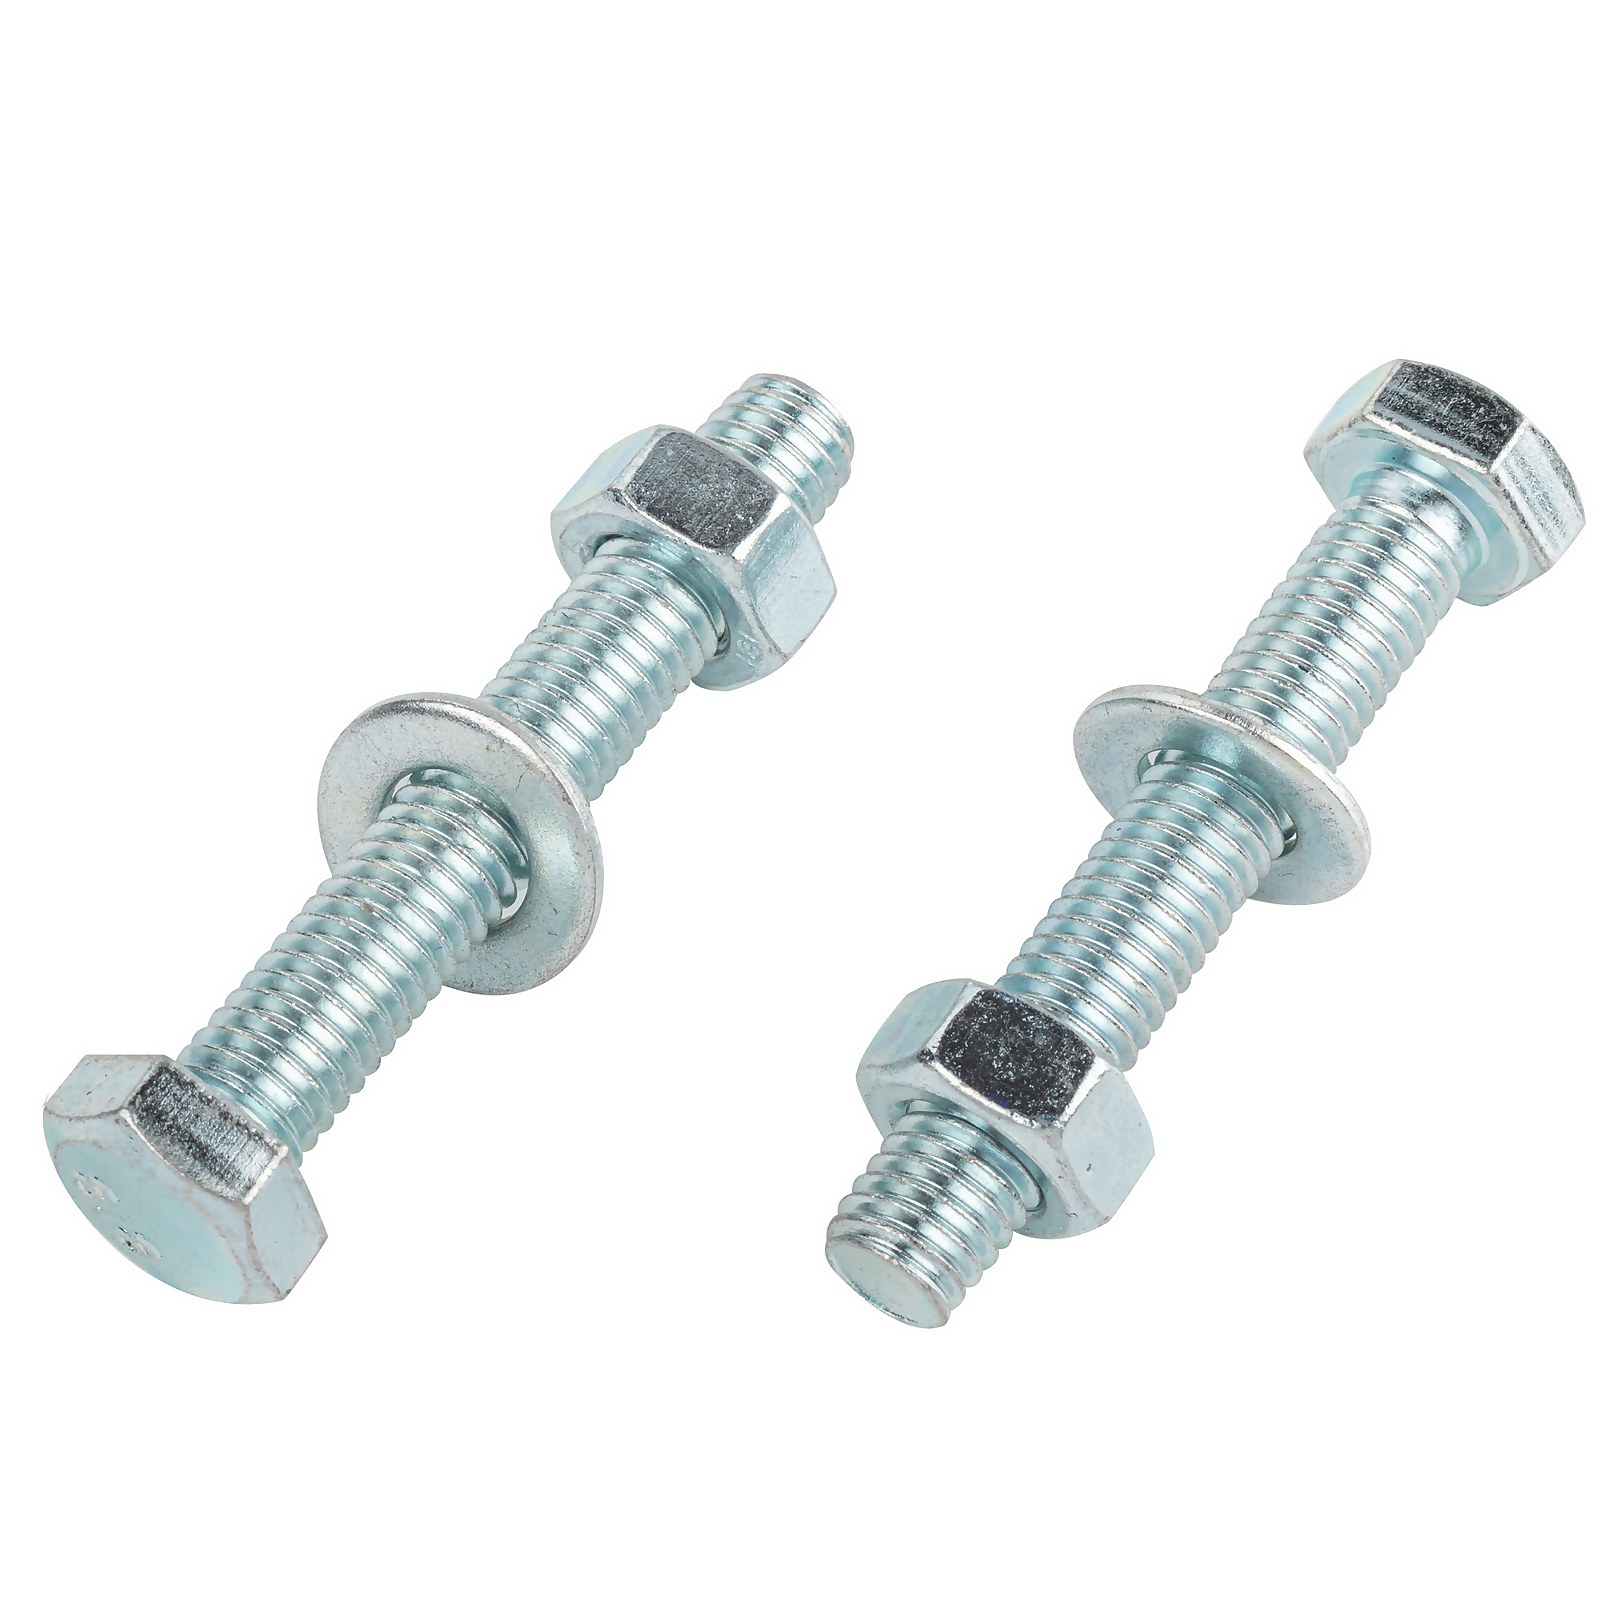 Photo of Homebase Zinc Plated Hex Bolt M10 50mm 5 Pack